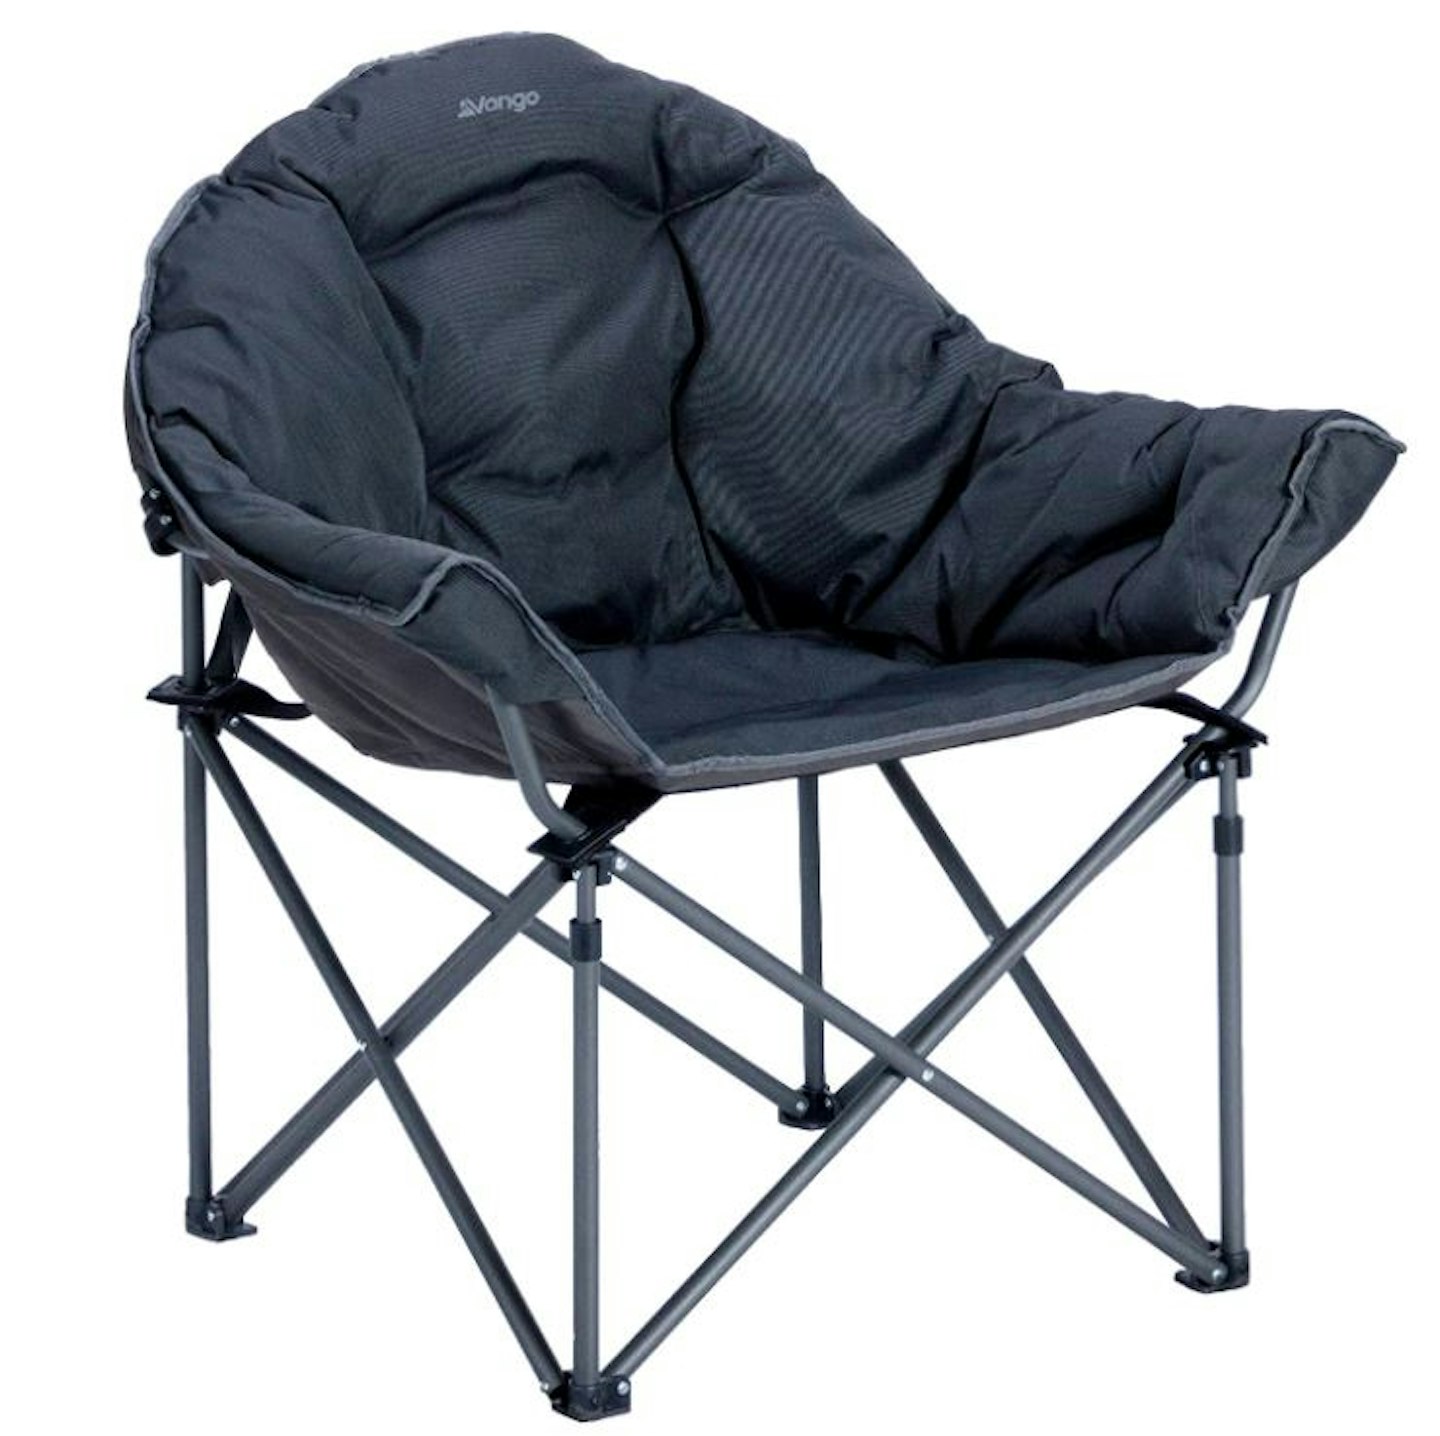 Vango Thor Oversized Foldable Camping Chair